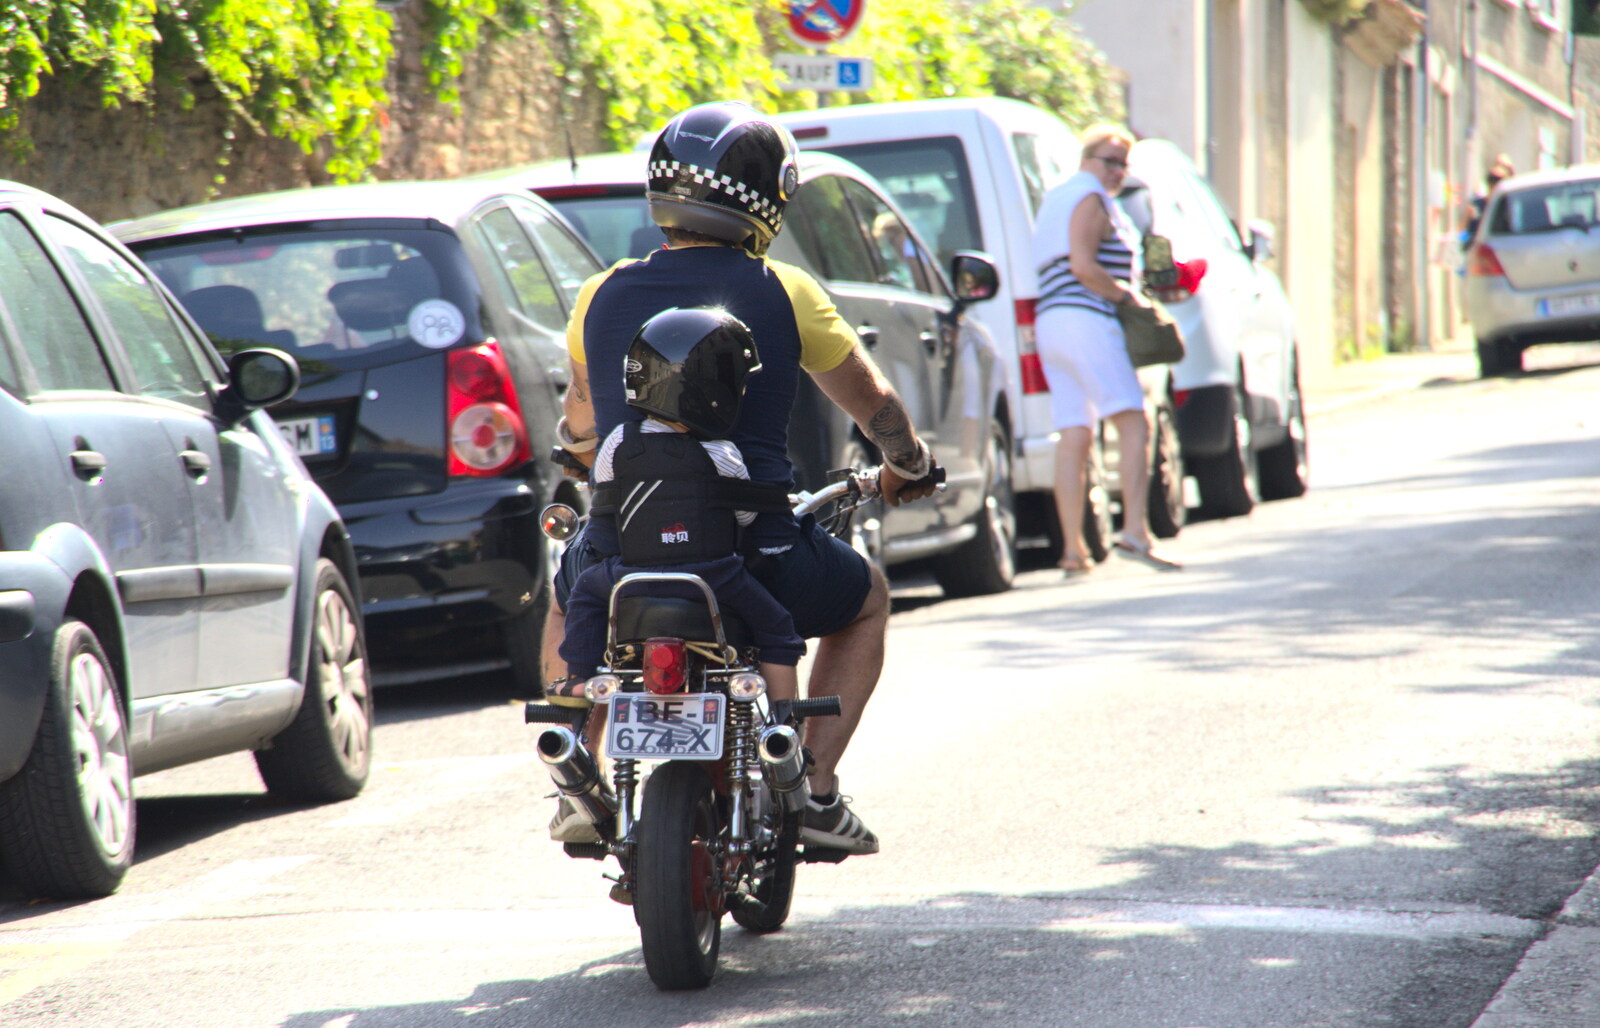 A tiny child on a moped from A Trip to Carcassonne, Aude, France - 8th August 2018